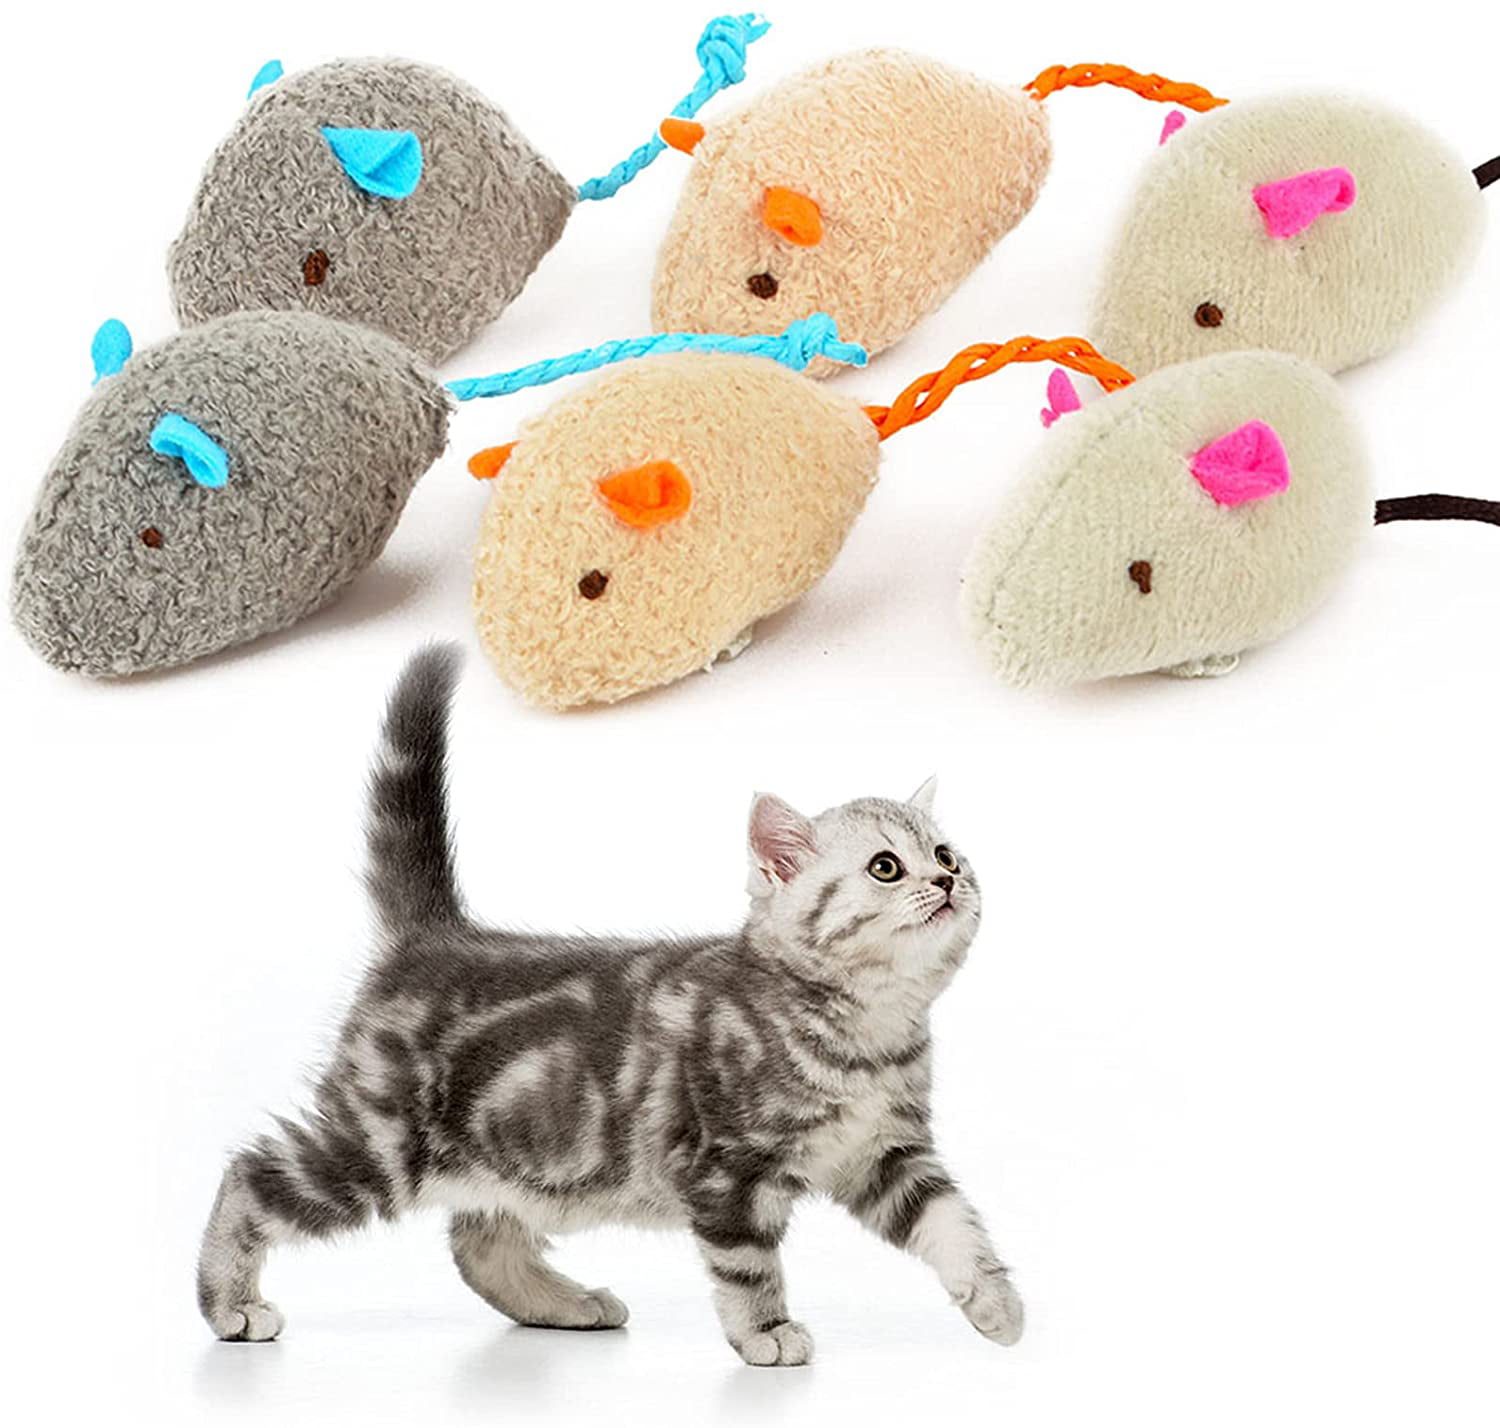 Cat Toy Funny Plush Mouse Mice Shaped Play Pet Kitten with Catnip Supply 10pcs 